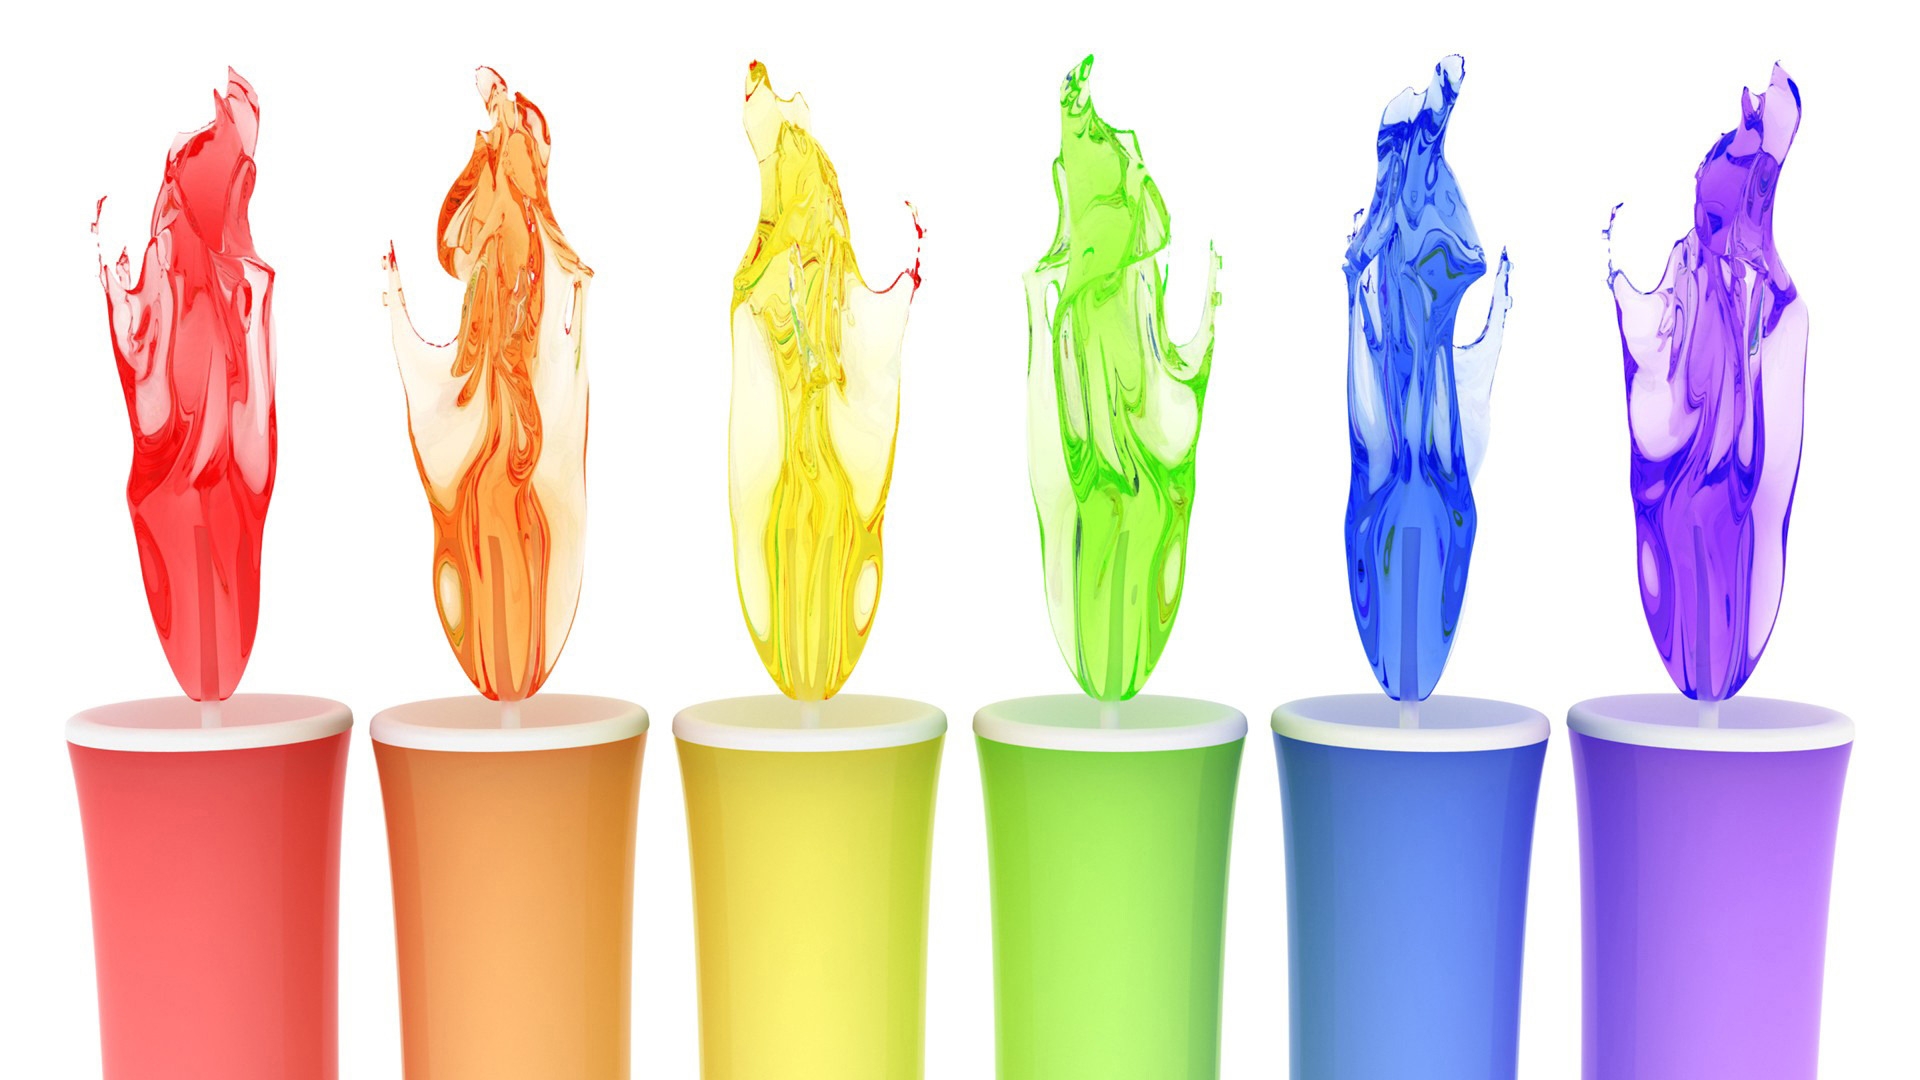 Colorful Candles for 1920 x 1080 HDTV 1080p resolution